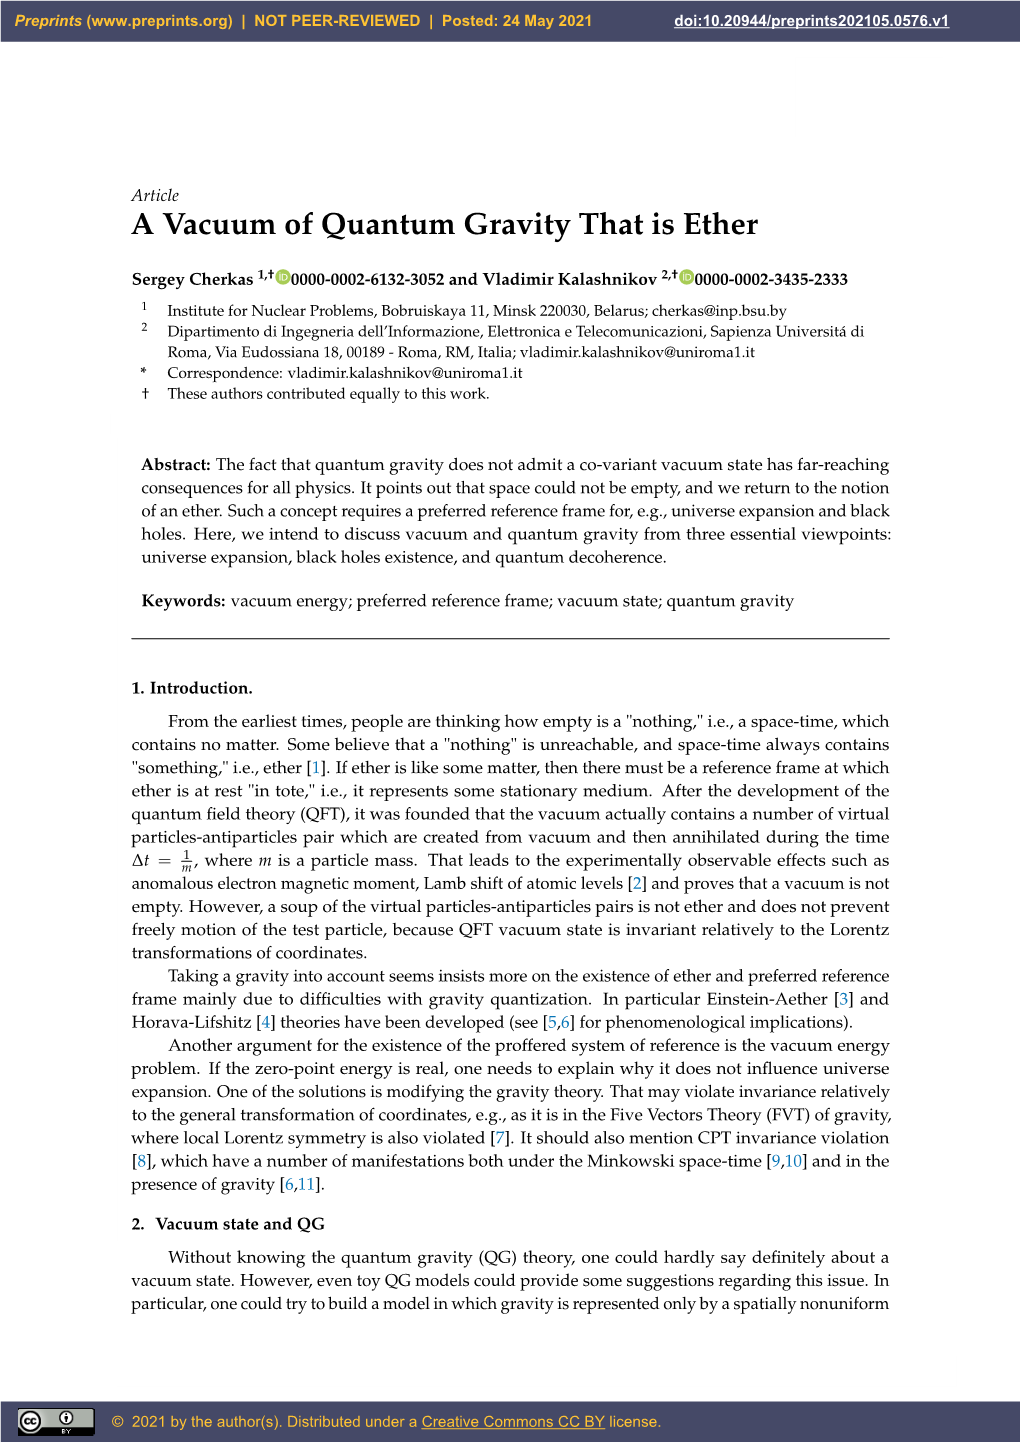 A Vacuum of Quantum Gravity That Is Ether